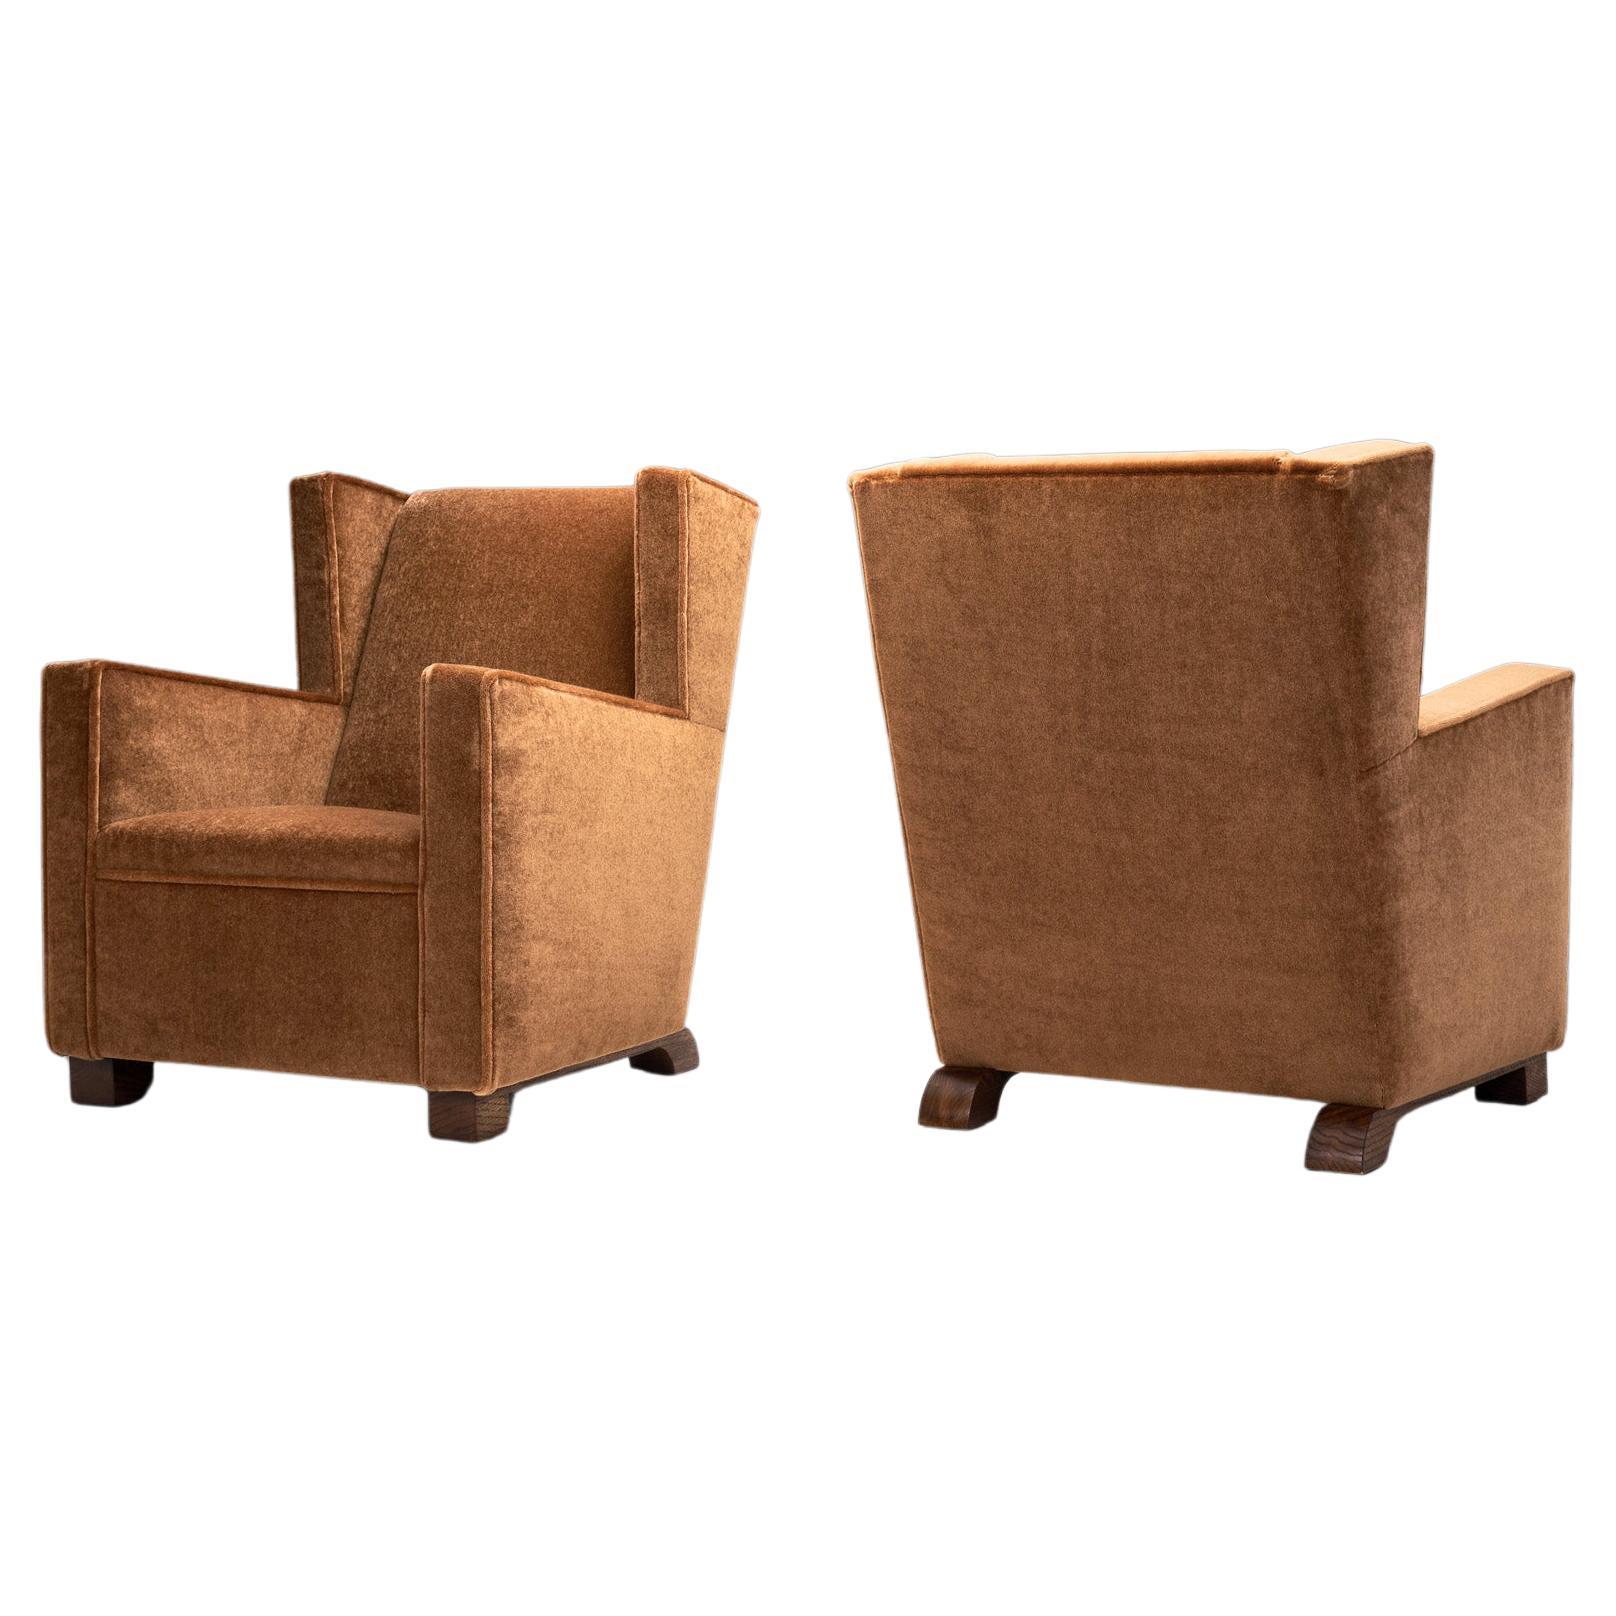 Set of Upholstered Art Deco Armchairs, Europe First Half of 20th Century For Sale